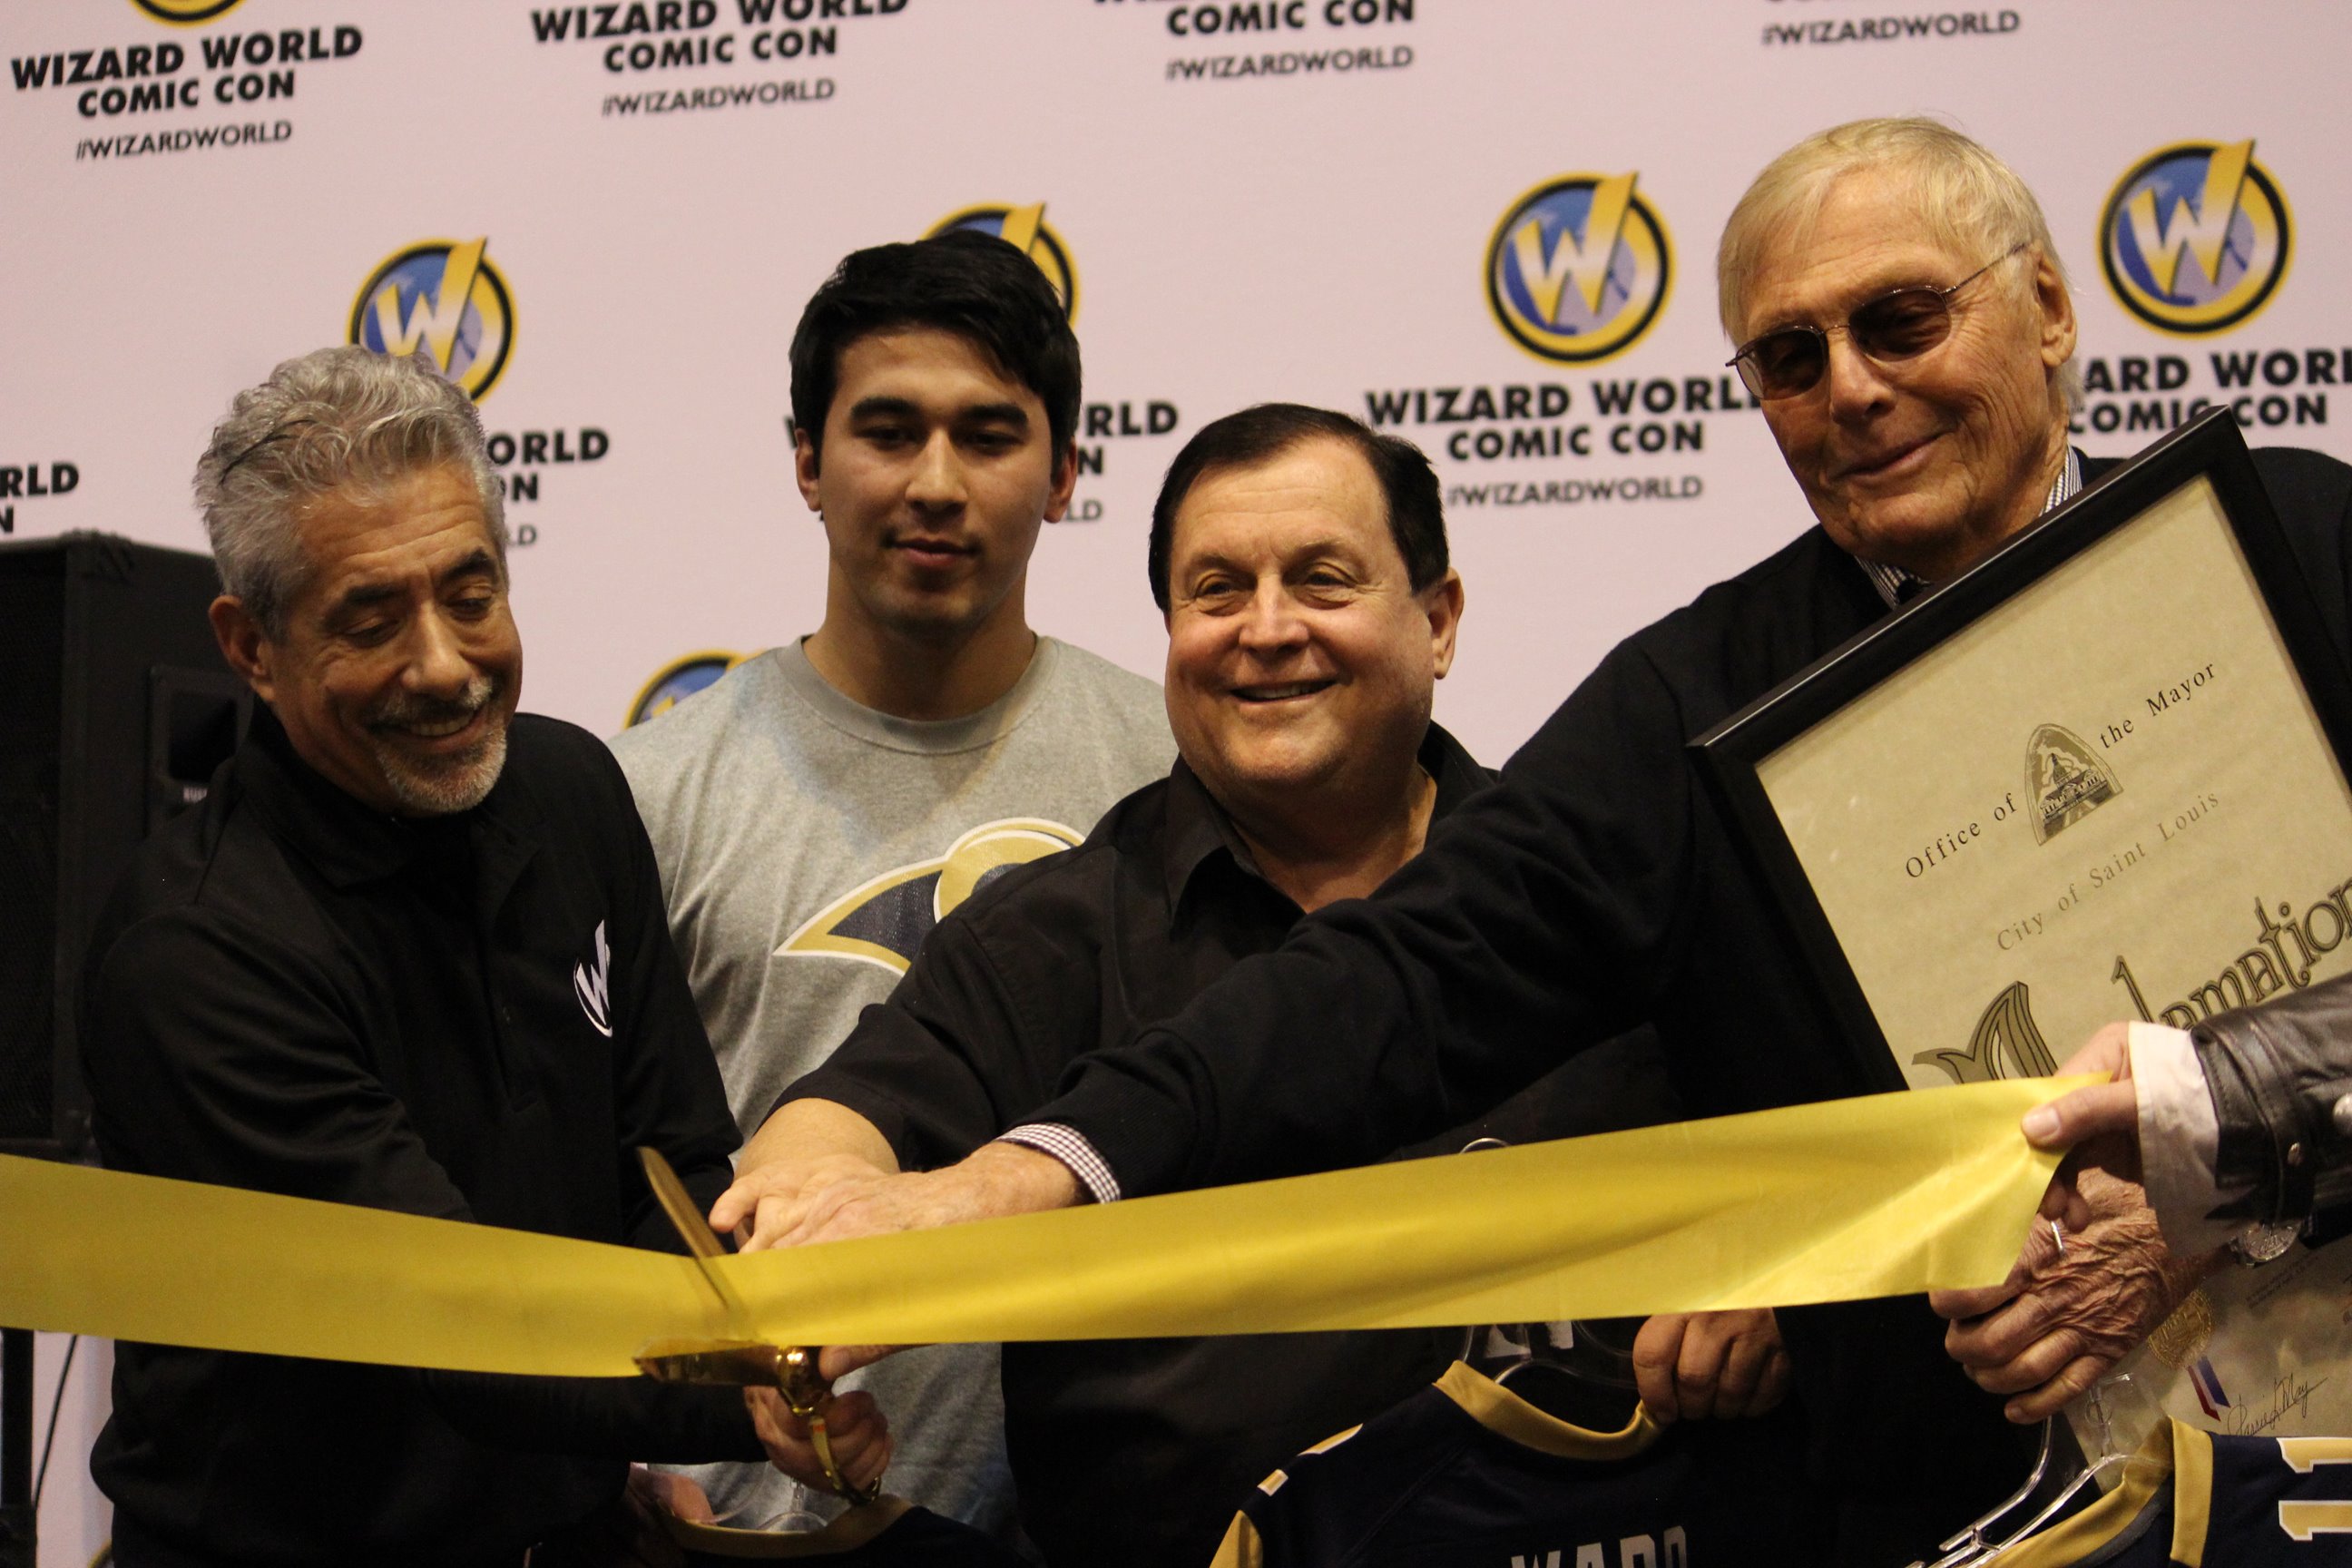 Adam West (Batman) and Burt Ward (Robin) cutting the ribbon for the proclamation that April 4, 2014 was Batman and Robin Day in St. Louis.